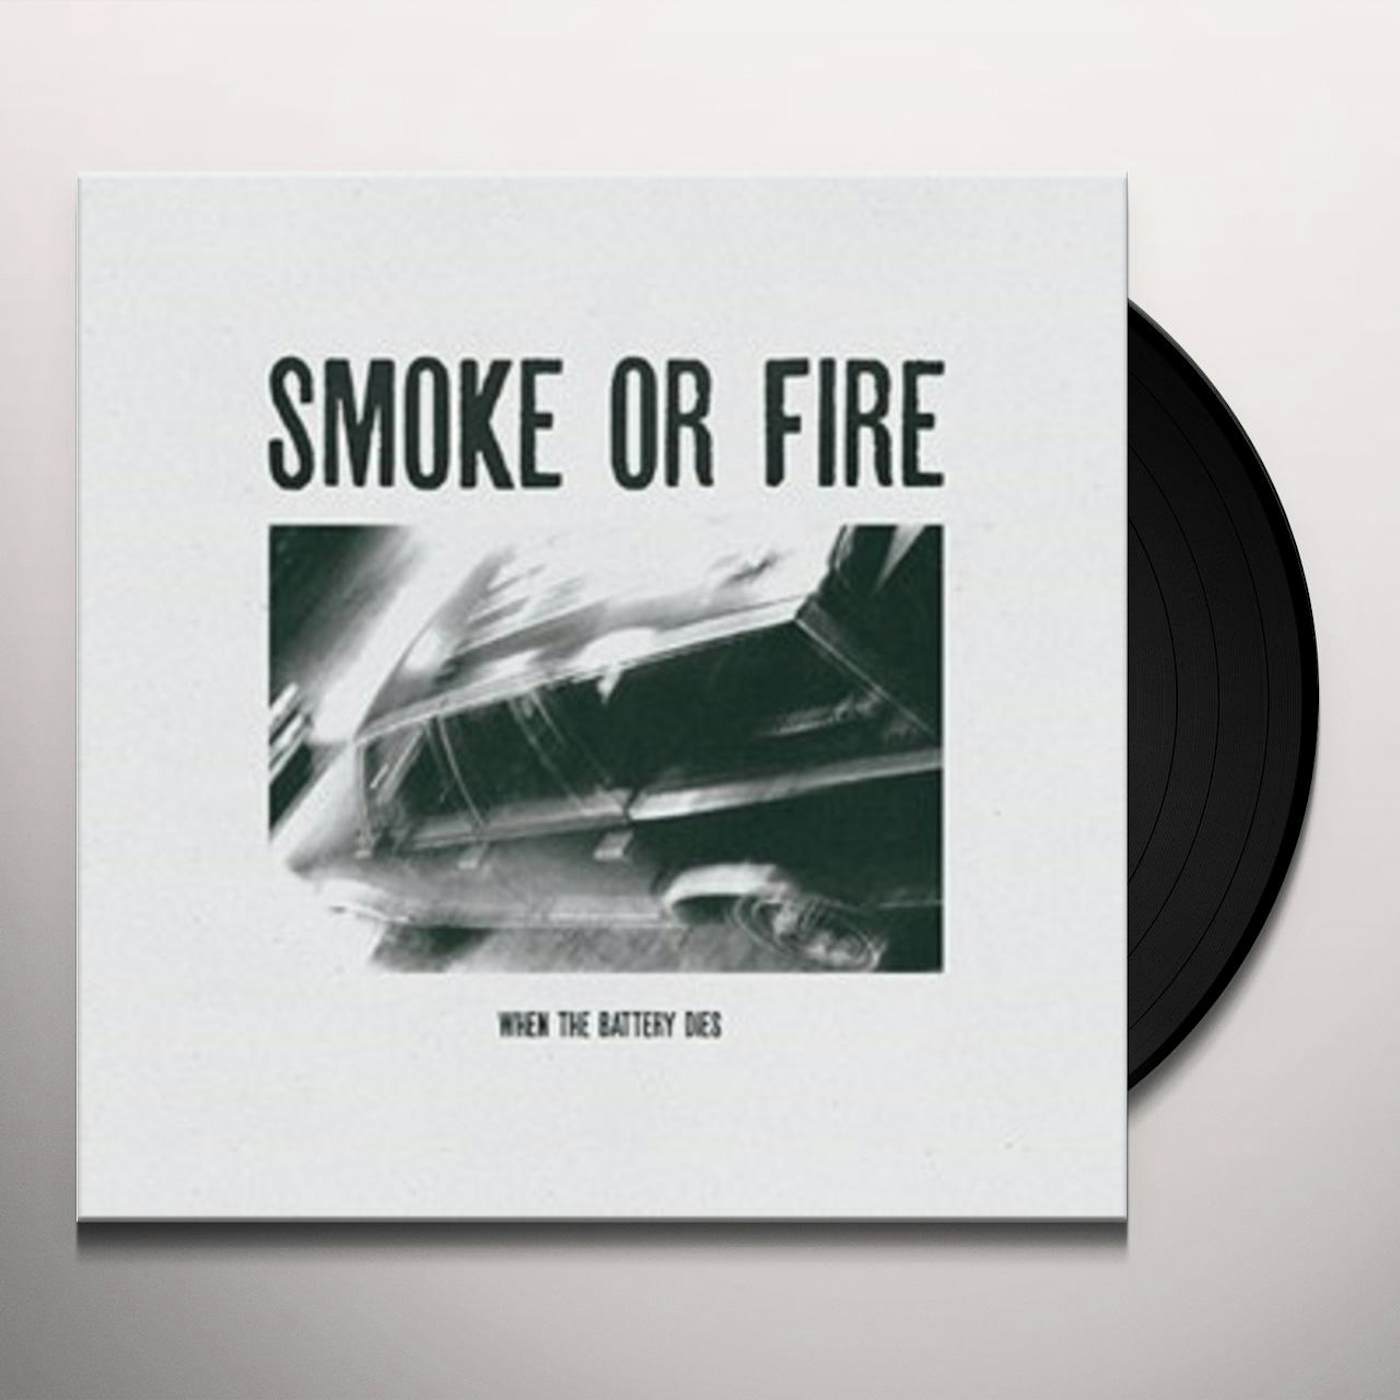 Smoke Or Fire When the Battery Dies Vinyl Record